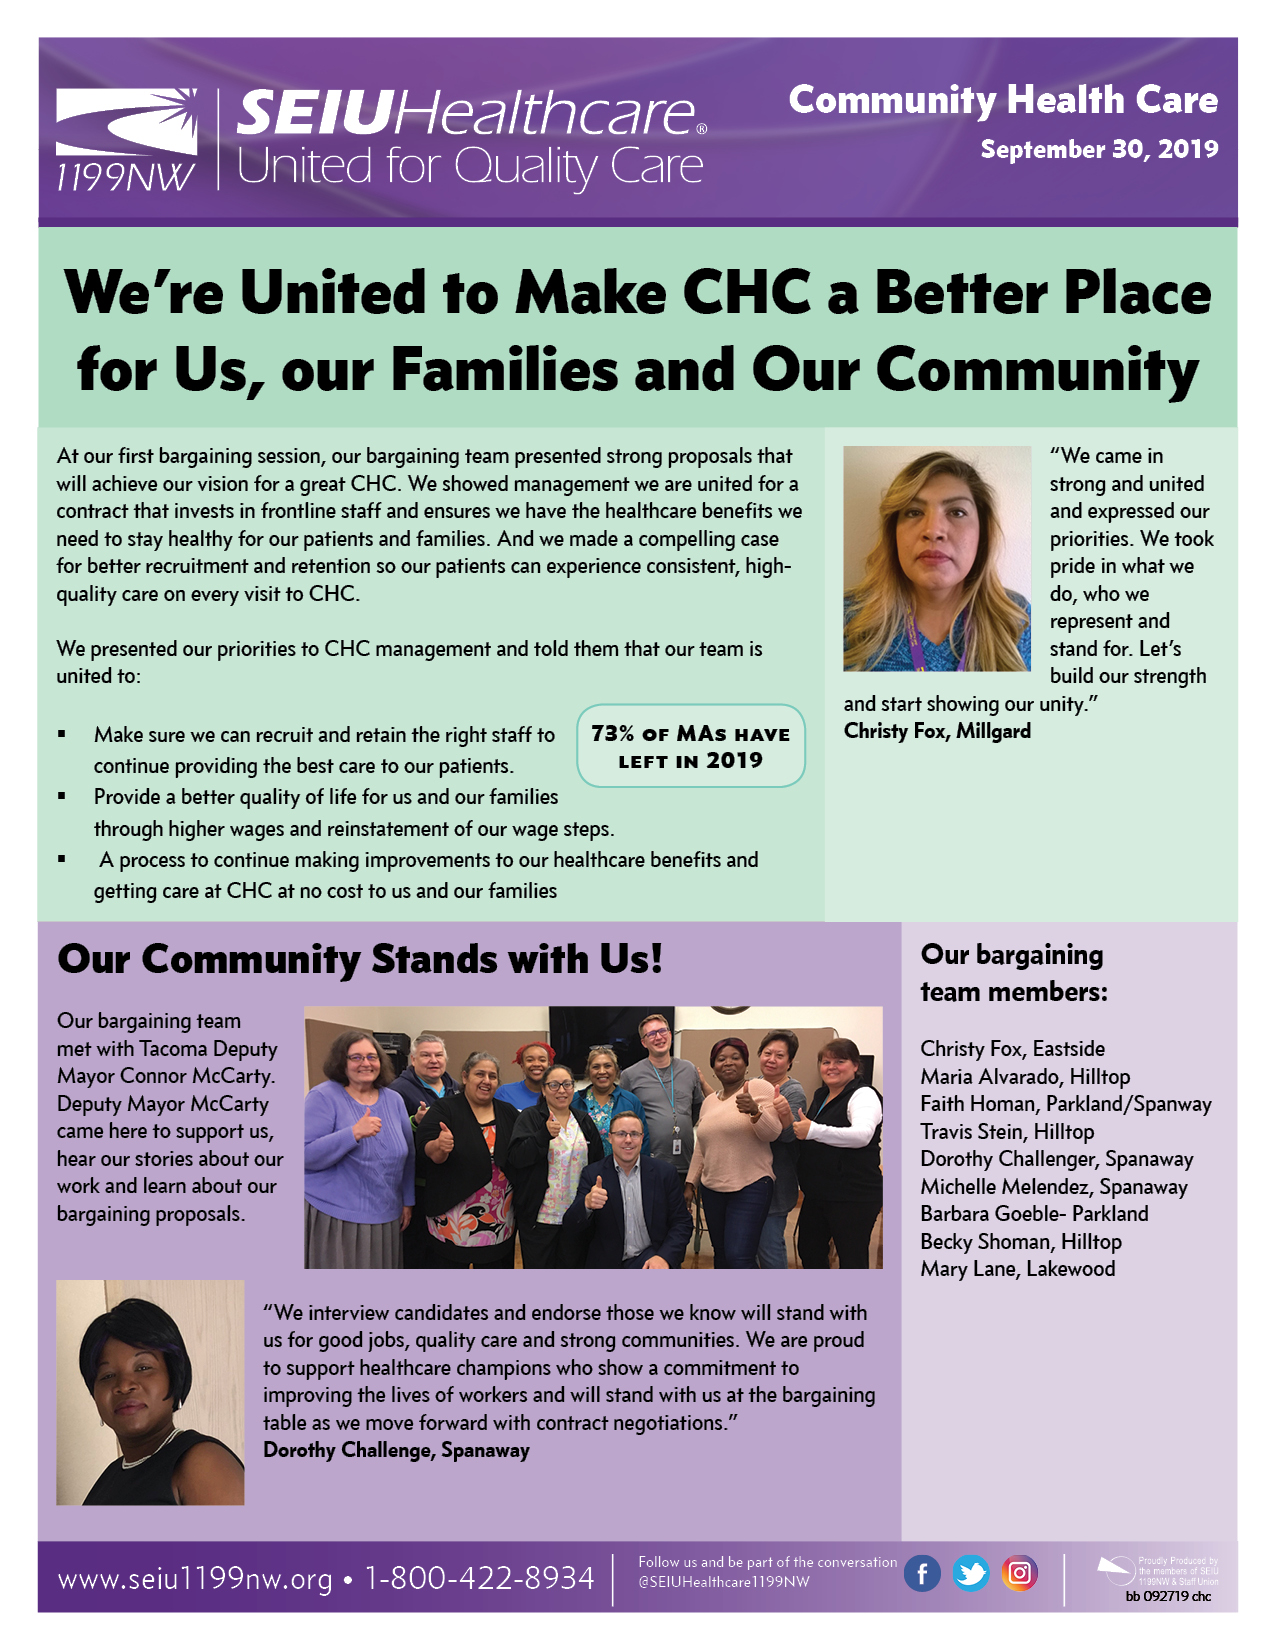 We’re United to Make CHC a Better Place for Us, our Families and Our Community